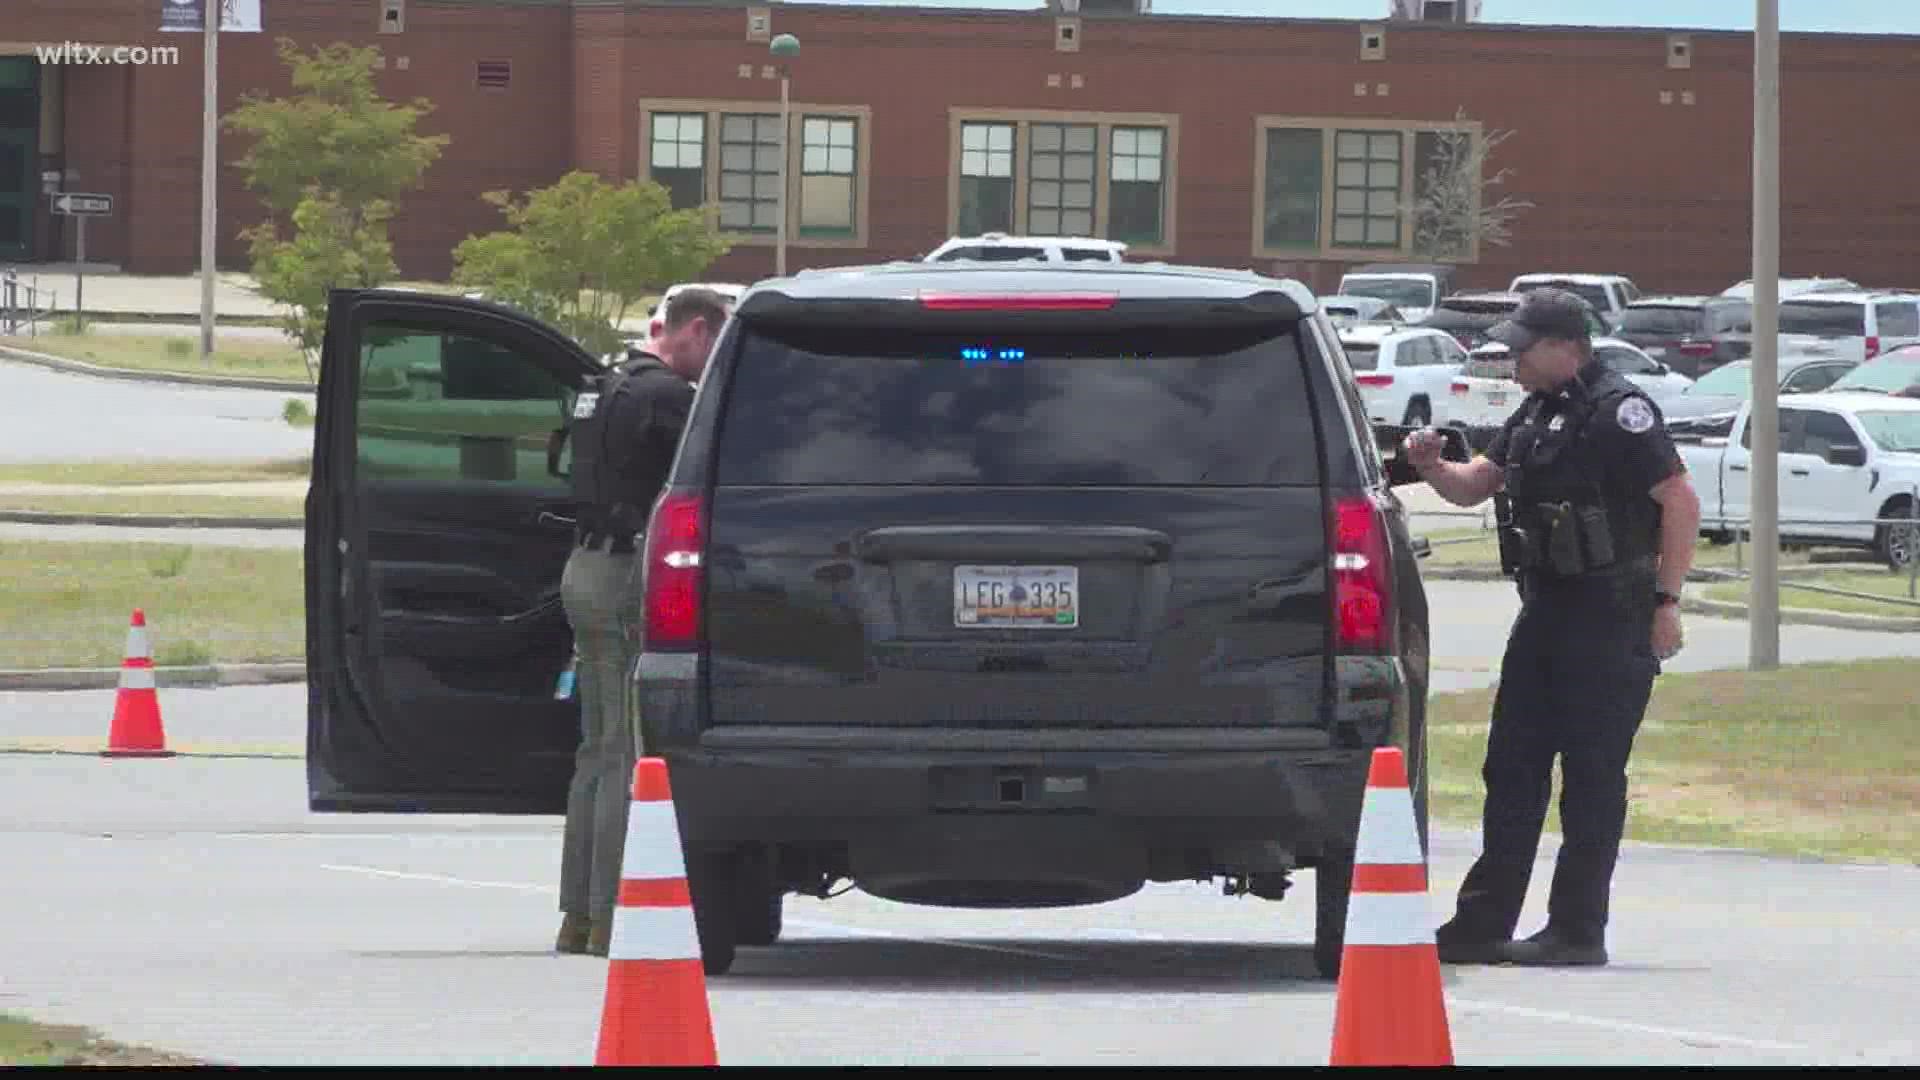 Students told administrators they thought a student had a gun, but after hours of investigation they determined that was unfounded.